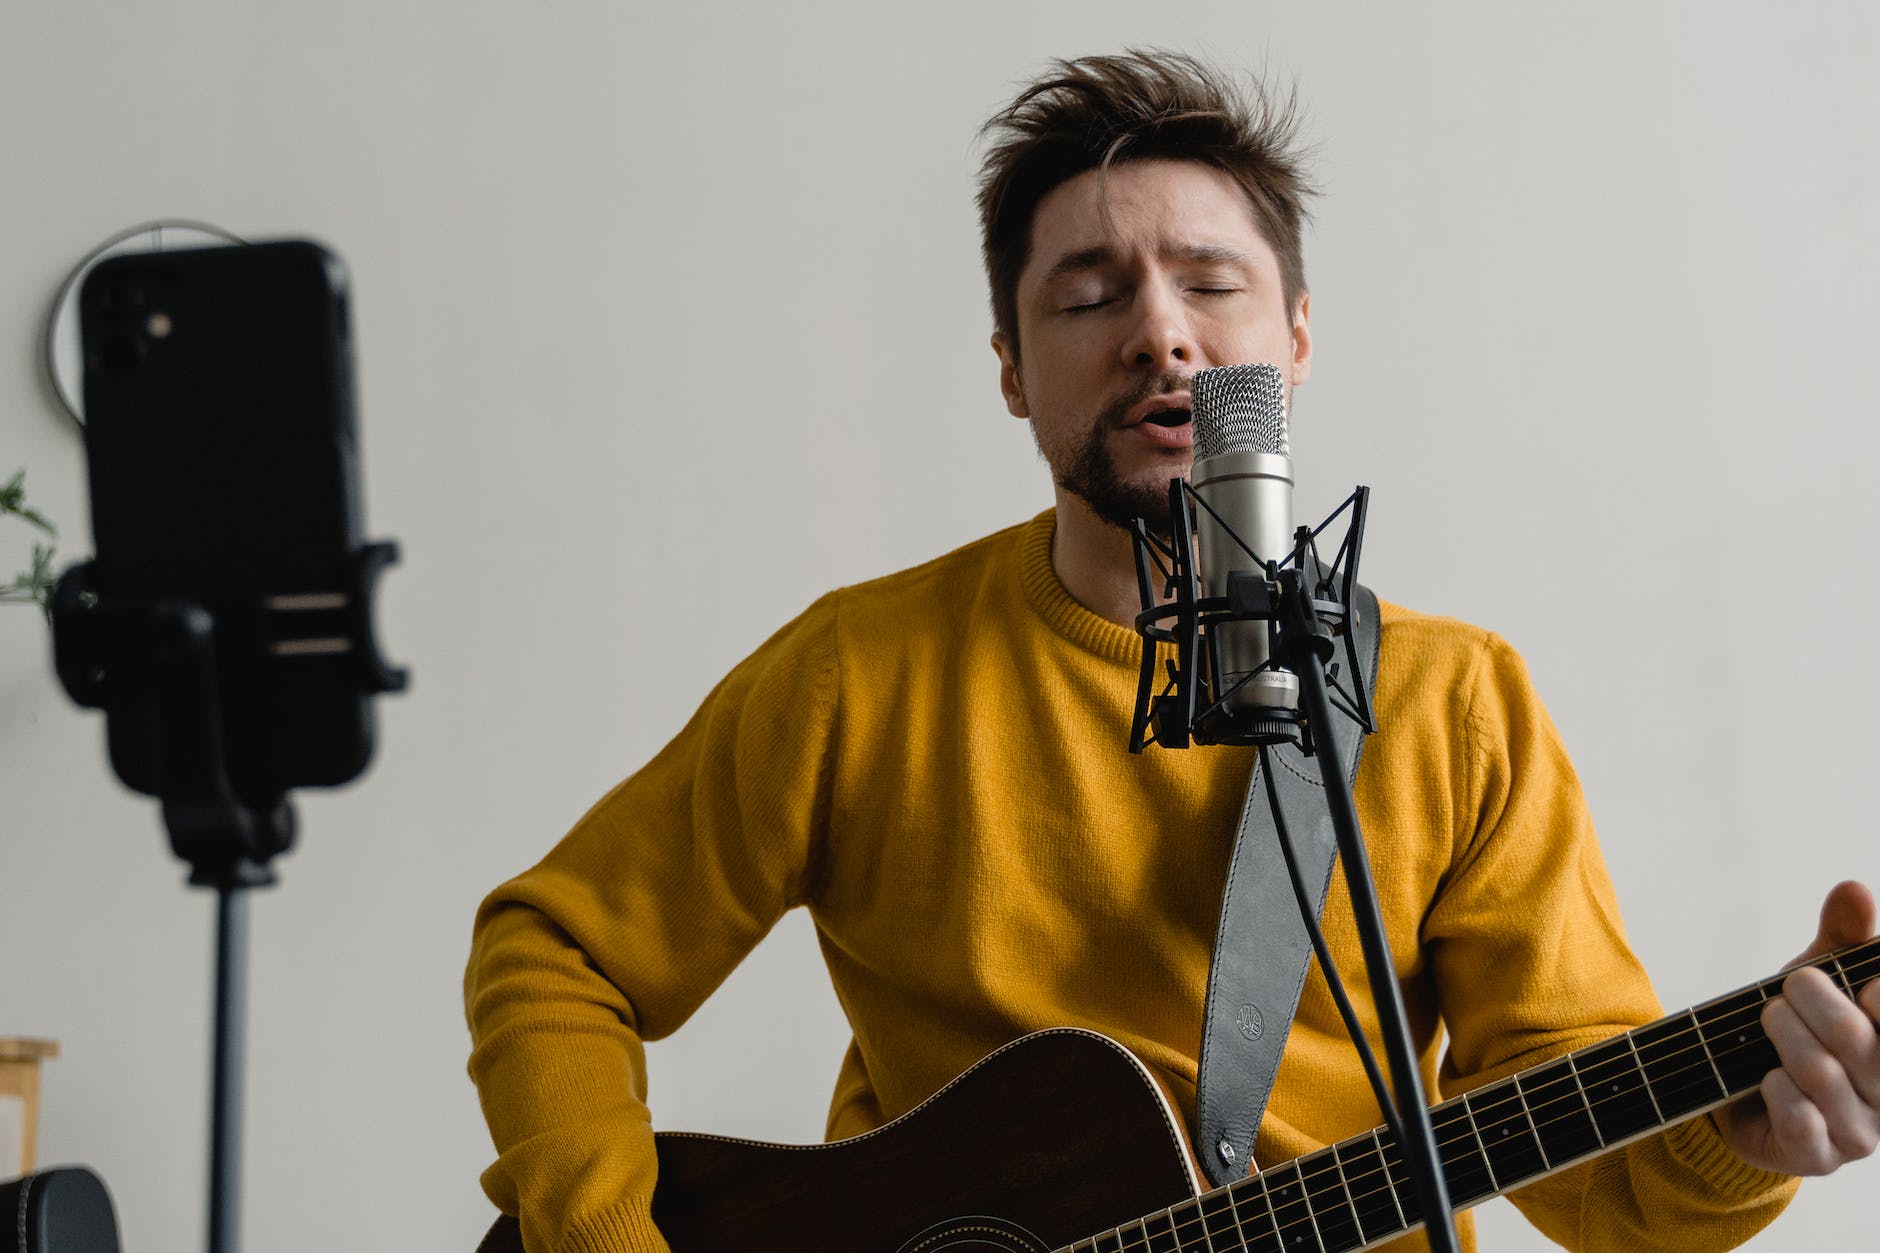 photo of a man in a yellow sweater singing while his eyes are closed